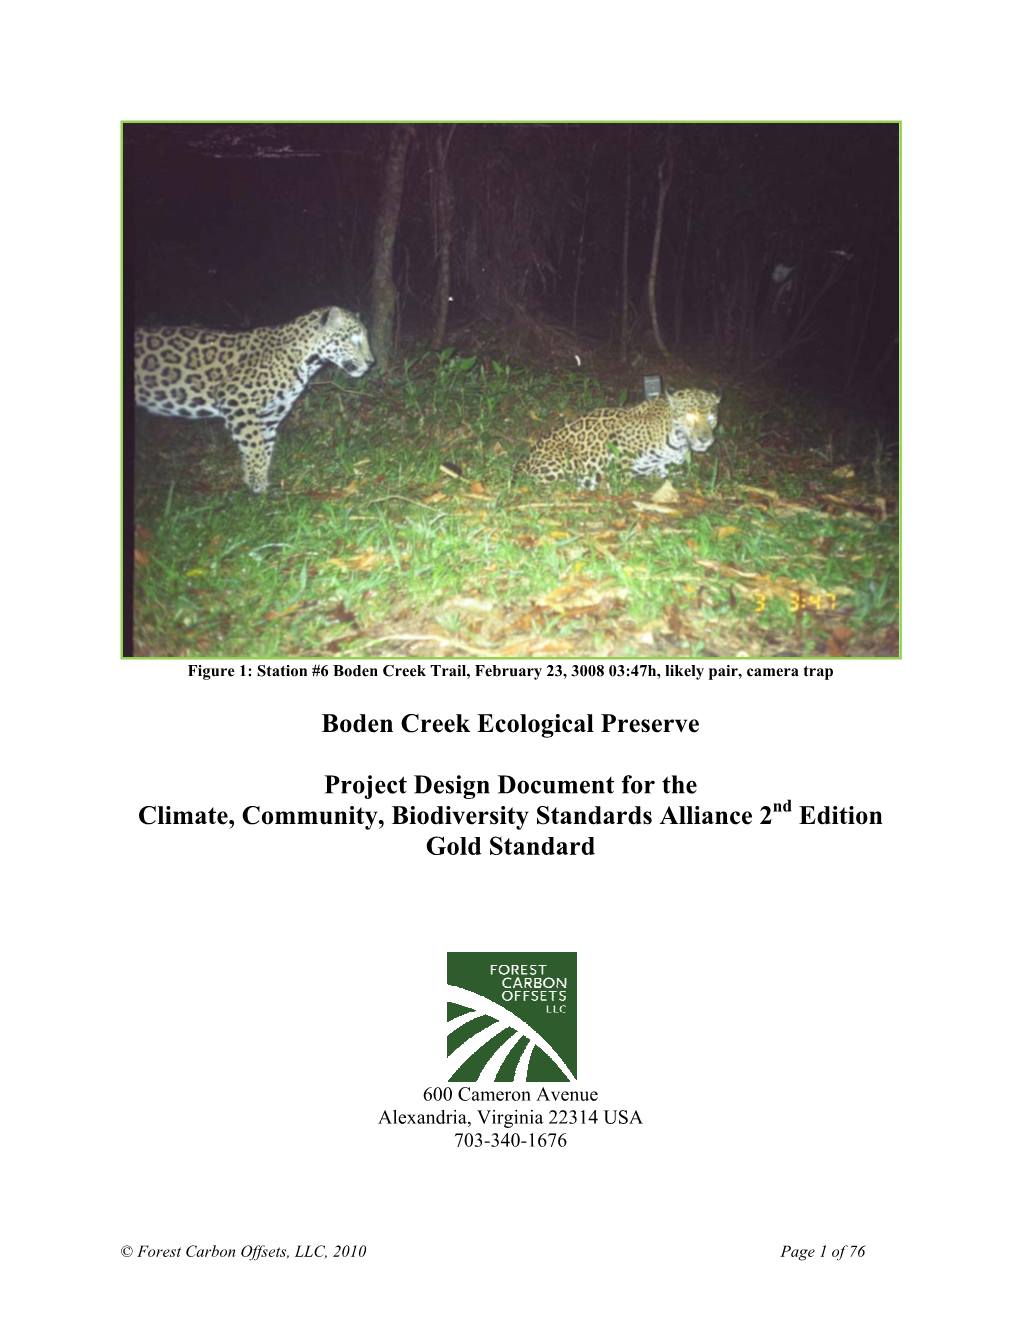 Boden Creek Ecological Preserve Project Design Document for The